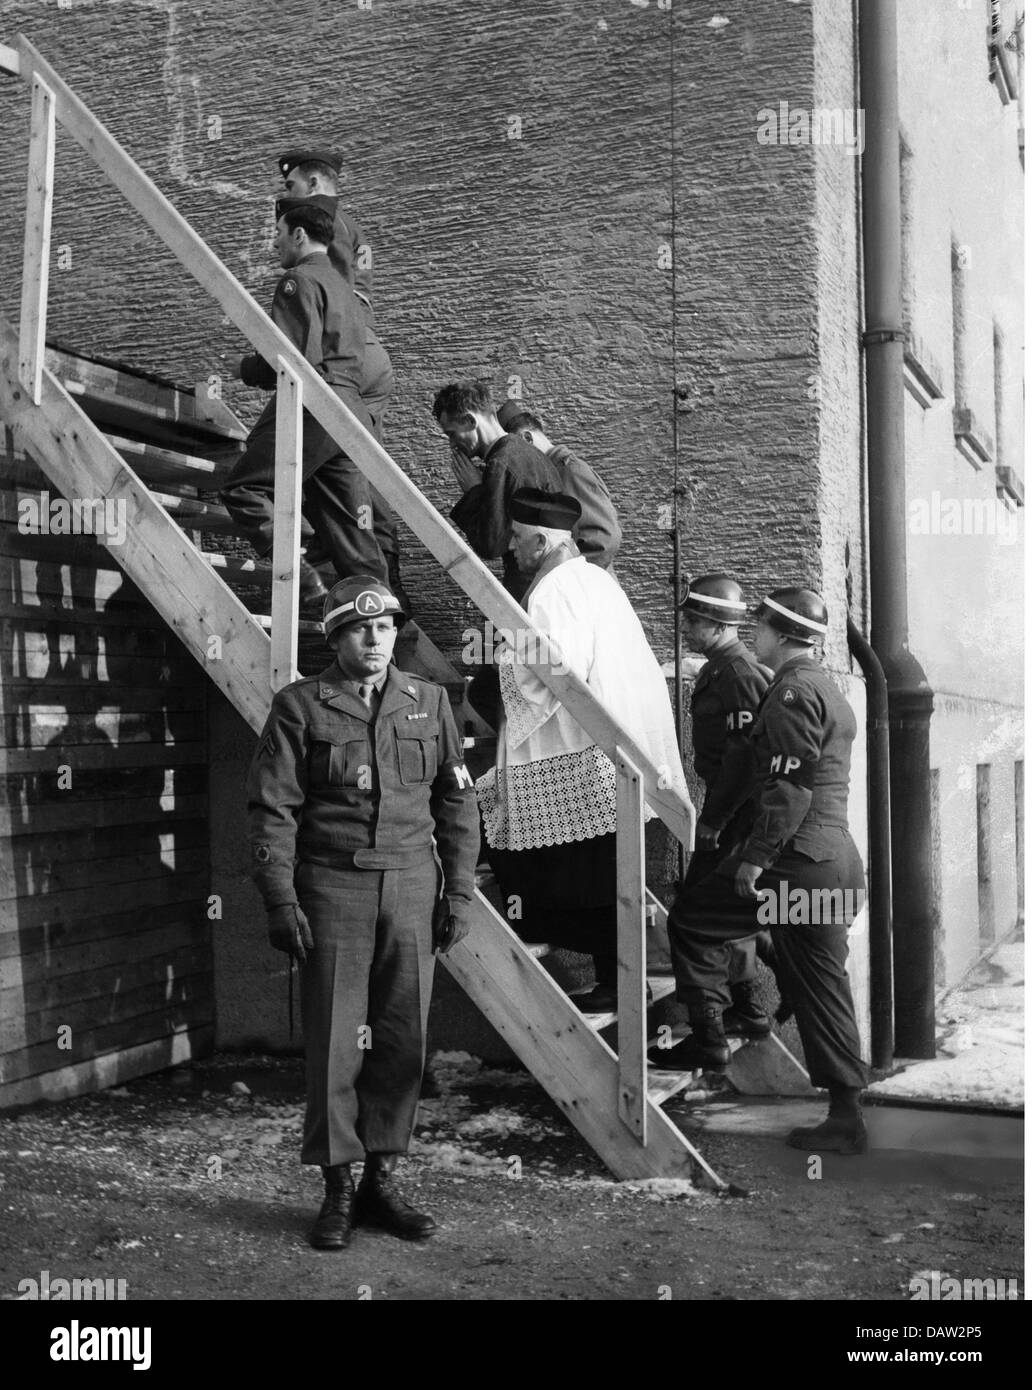 justice, penitentiary system, hanging, execution of Anton Schosser for murdering a shoot down American aviator, Landsberg am Lech, 24.1.1946, Additional-Rights-Clearences-Not Available Stock Photo